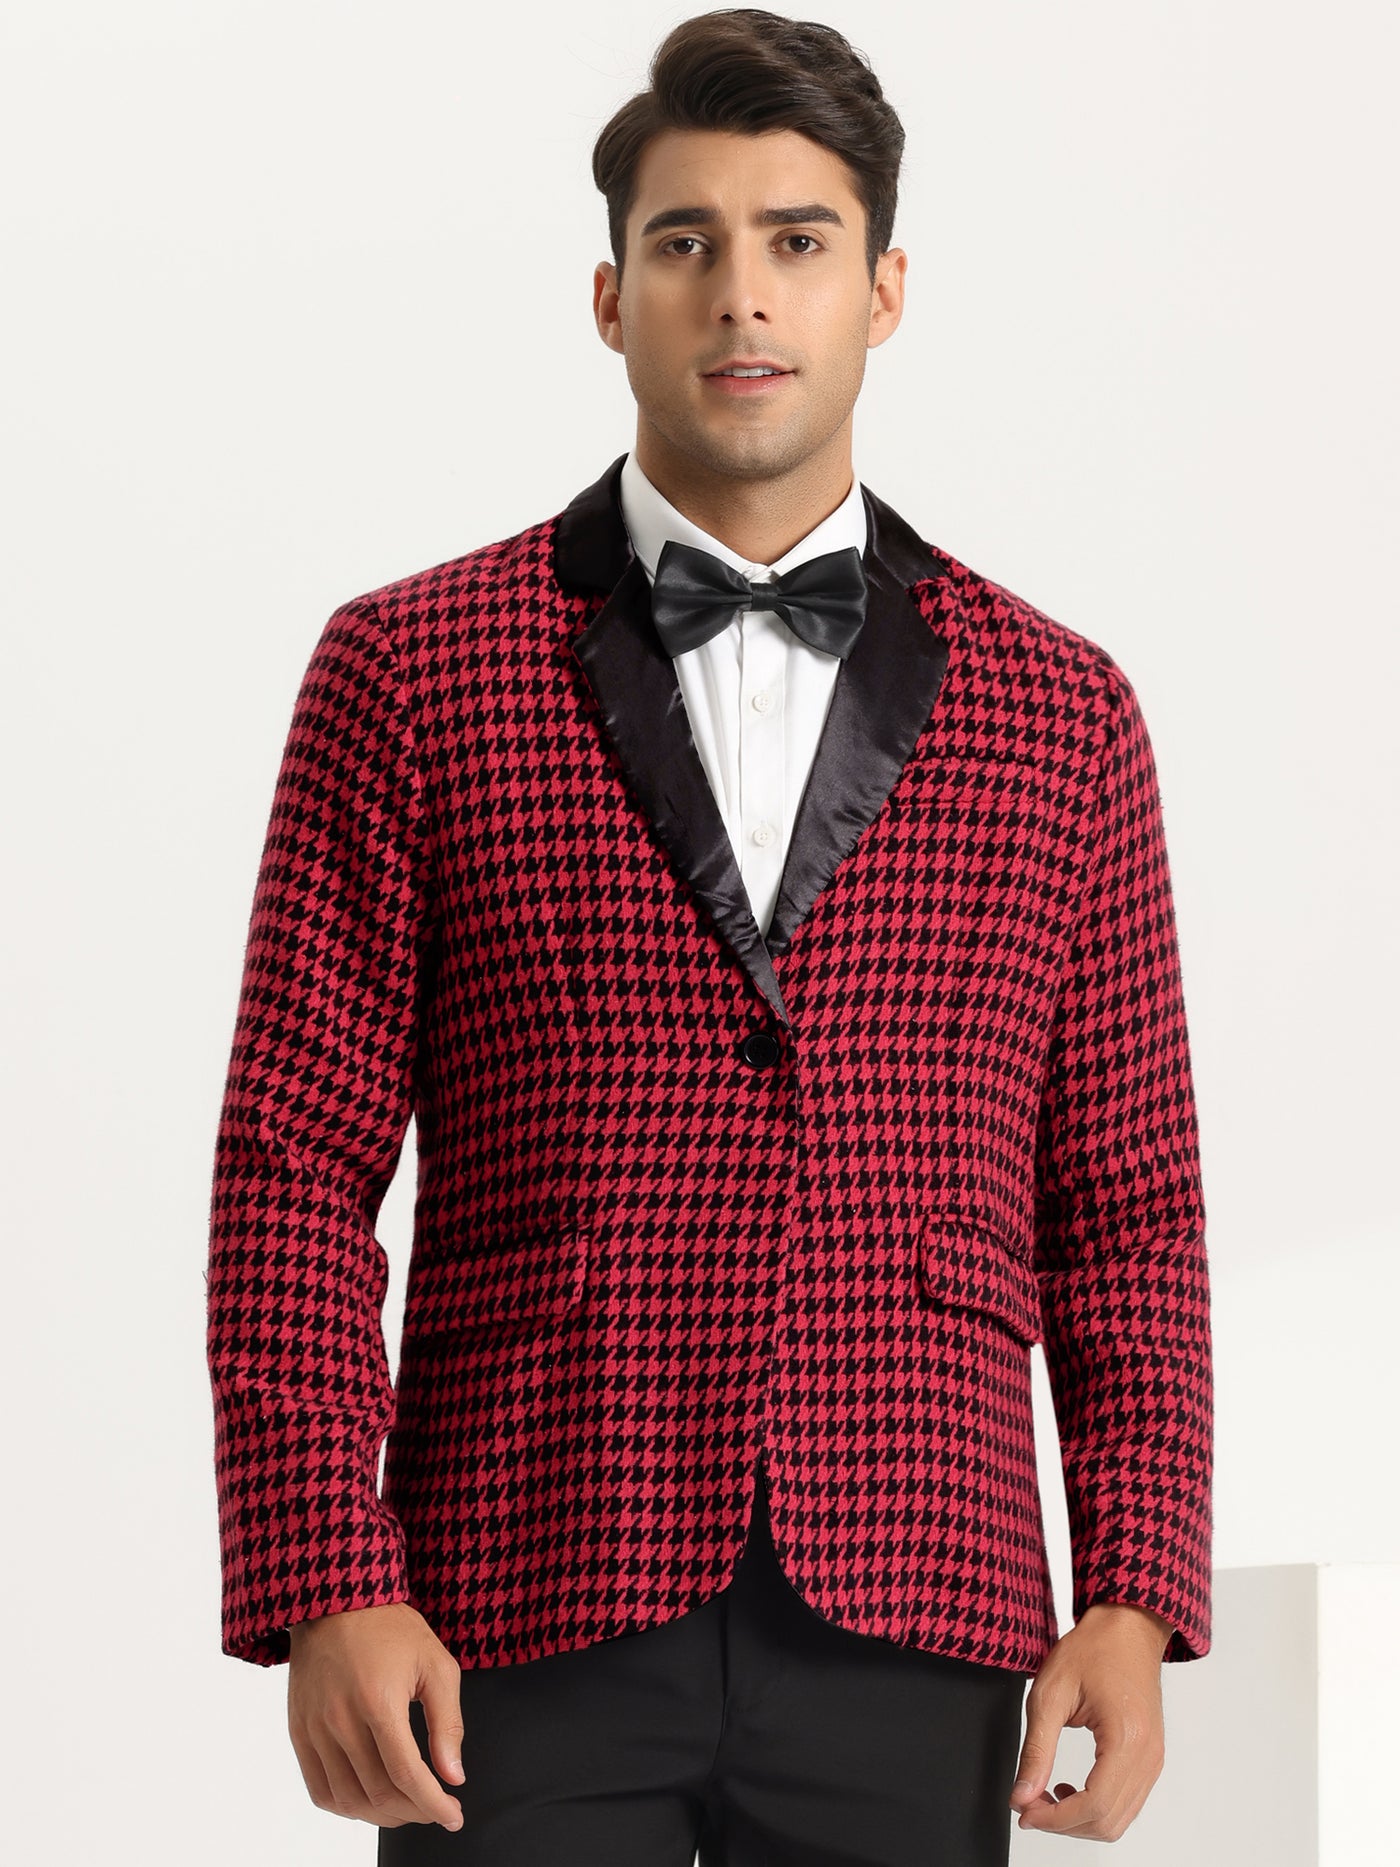 Bublédon Houndstooth Print Blazer for Men's Slim Fit Contrast Collared Plaid Sports Coat